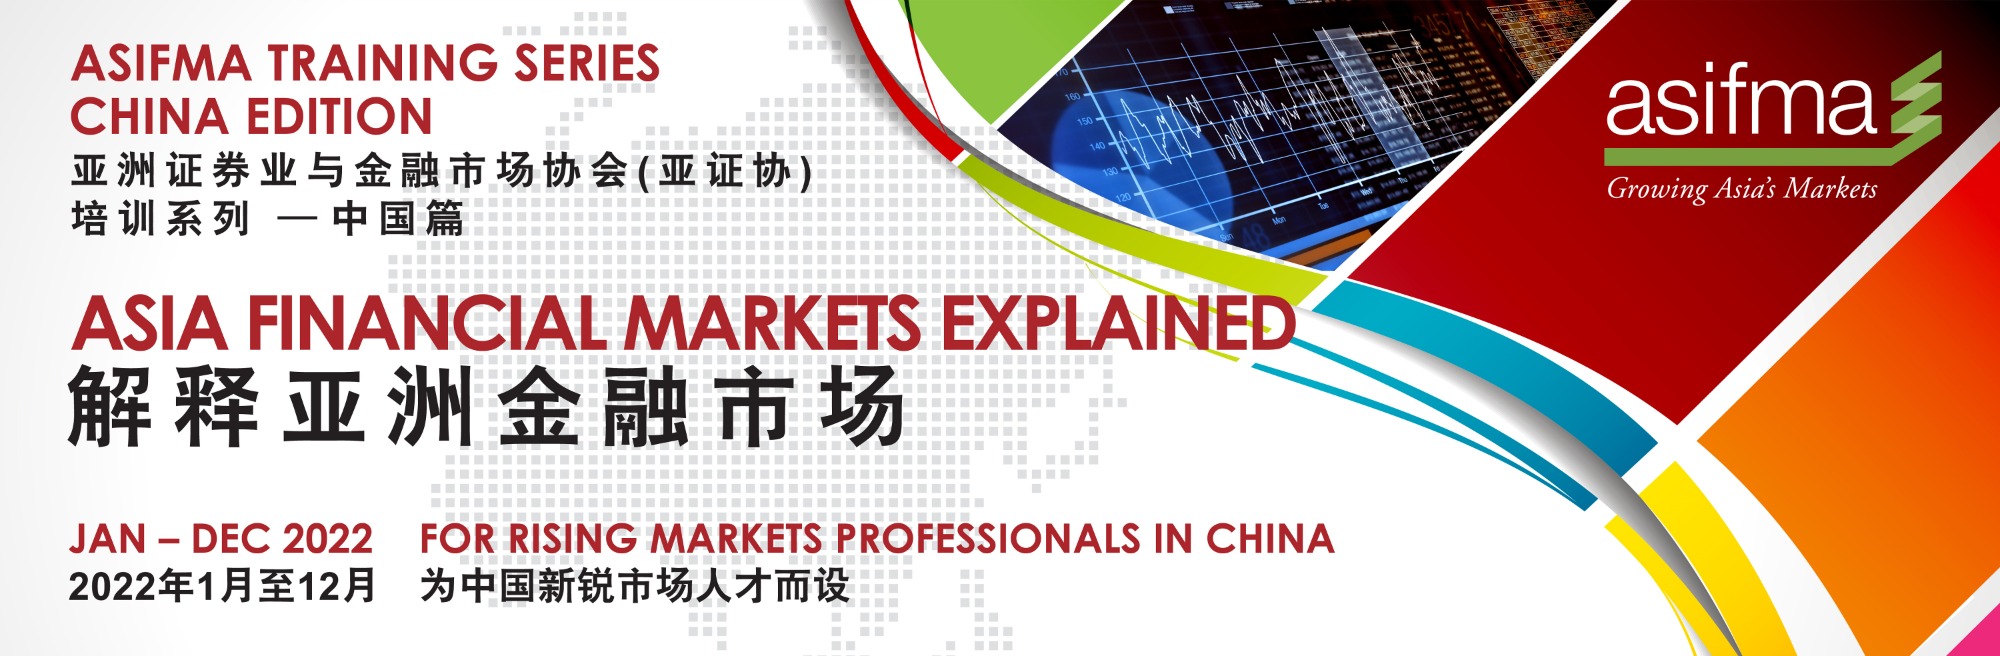 ASIFMA Training Series – China Edition: Asia Financial Markets Explained